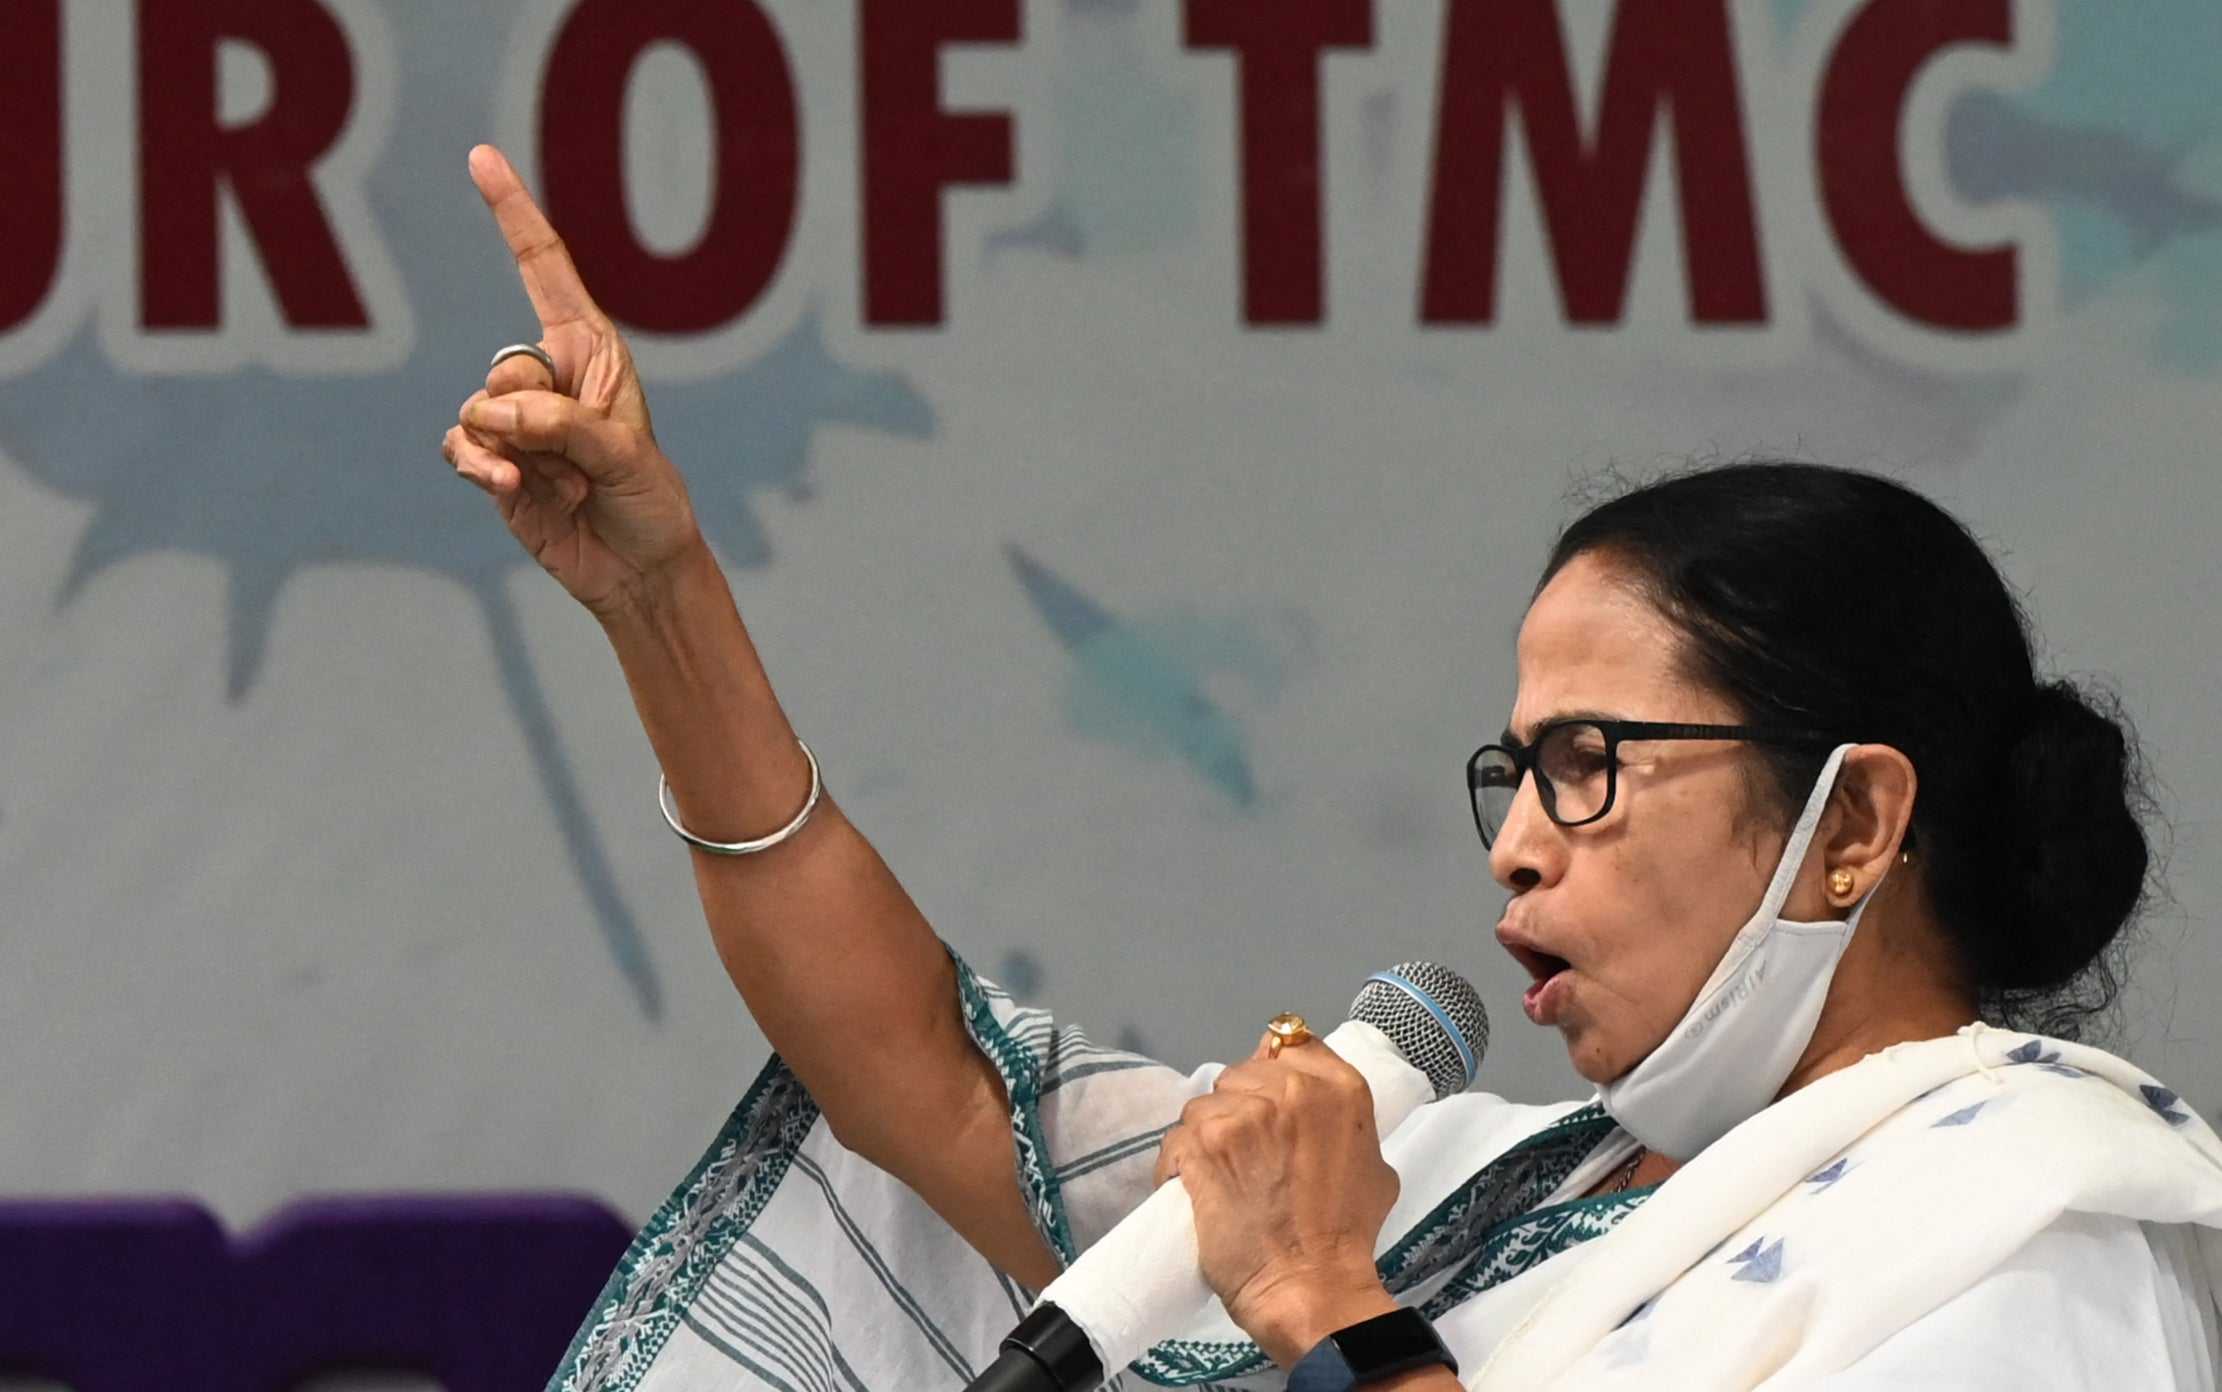 Chief minister of West Bengal Mamata Banerjee speaks during a public meeting in Kolkata